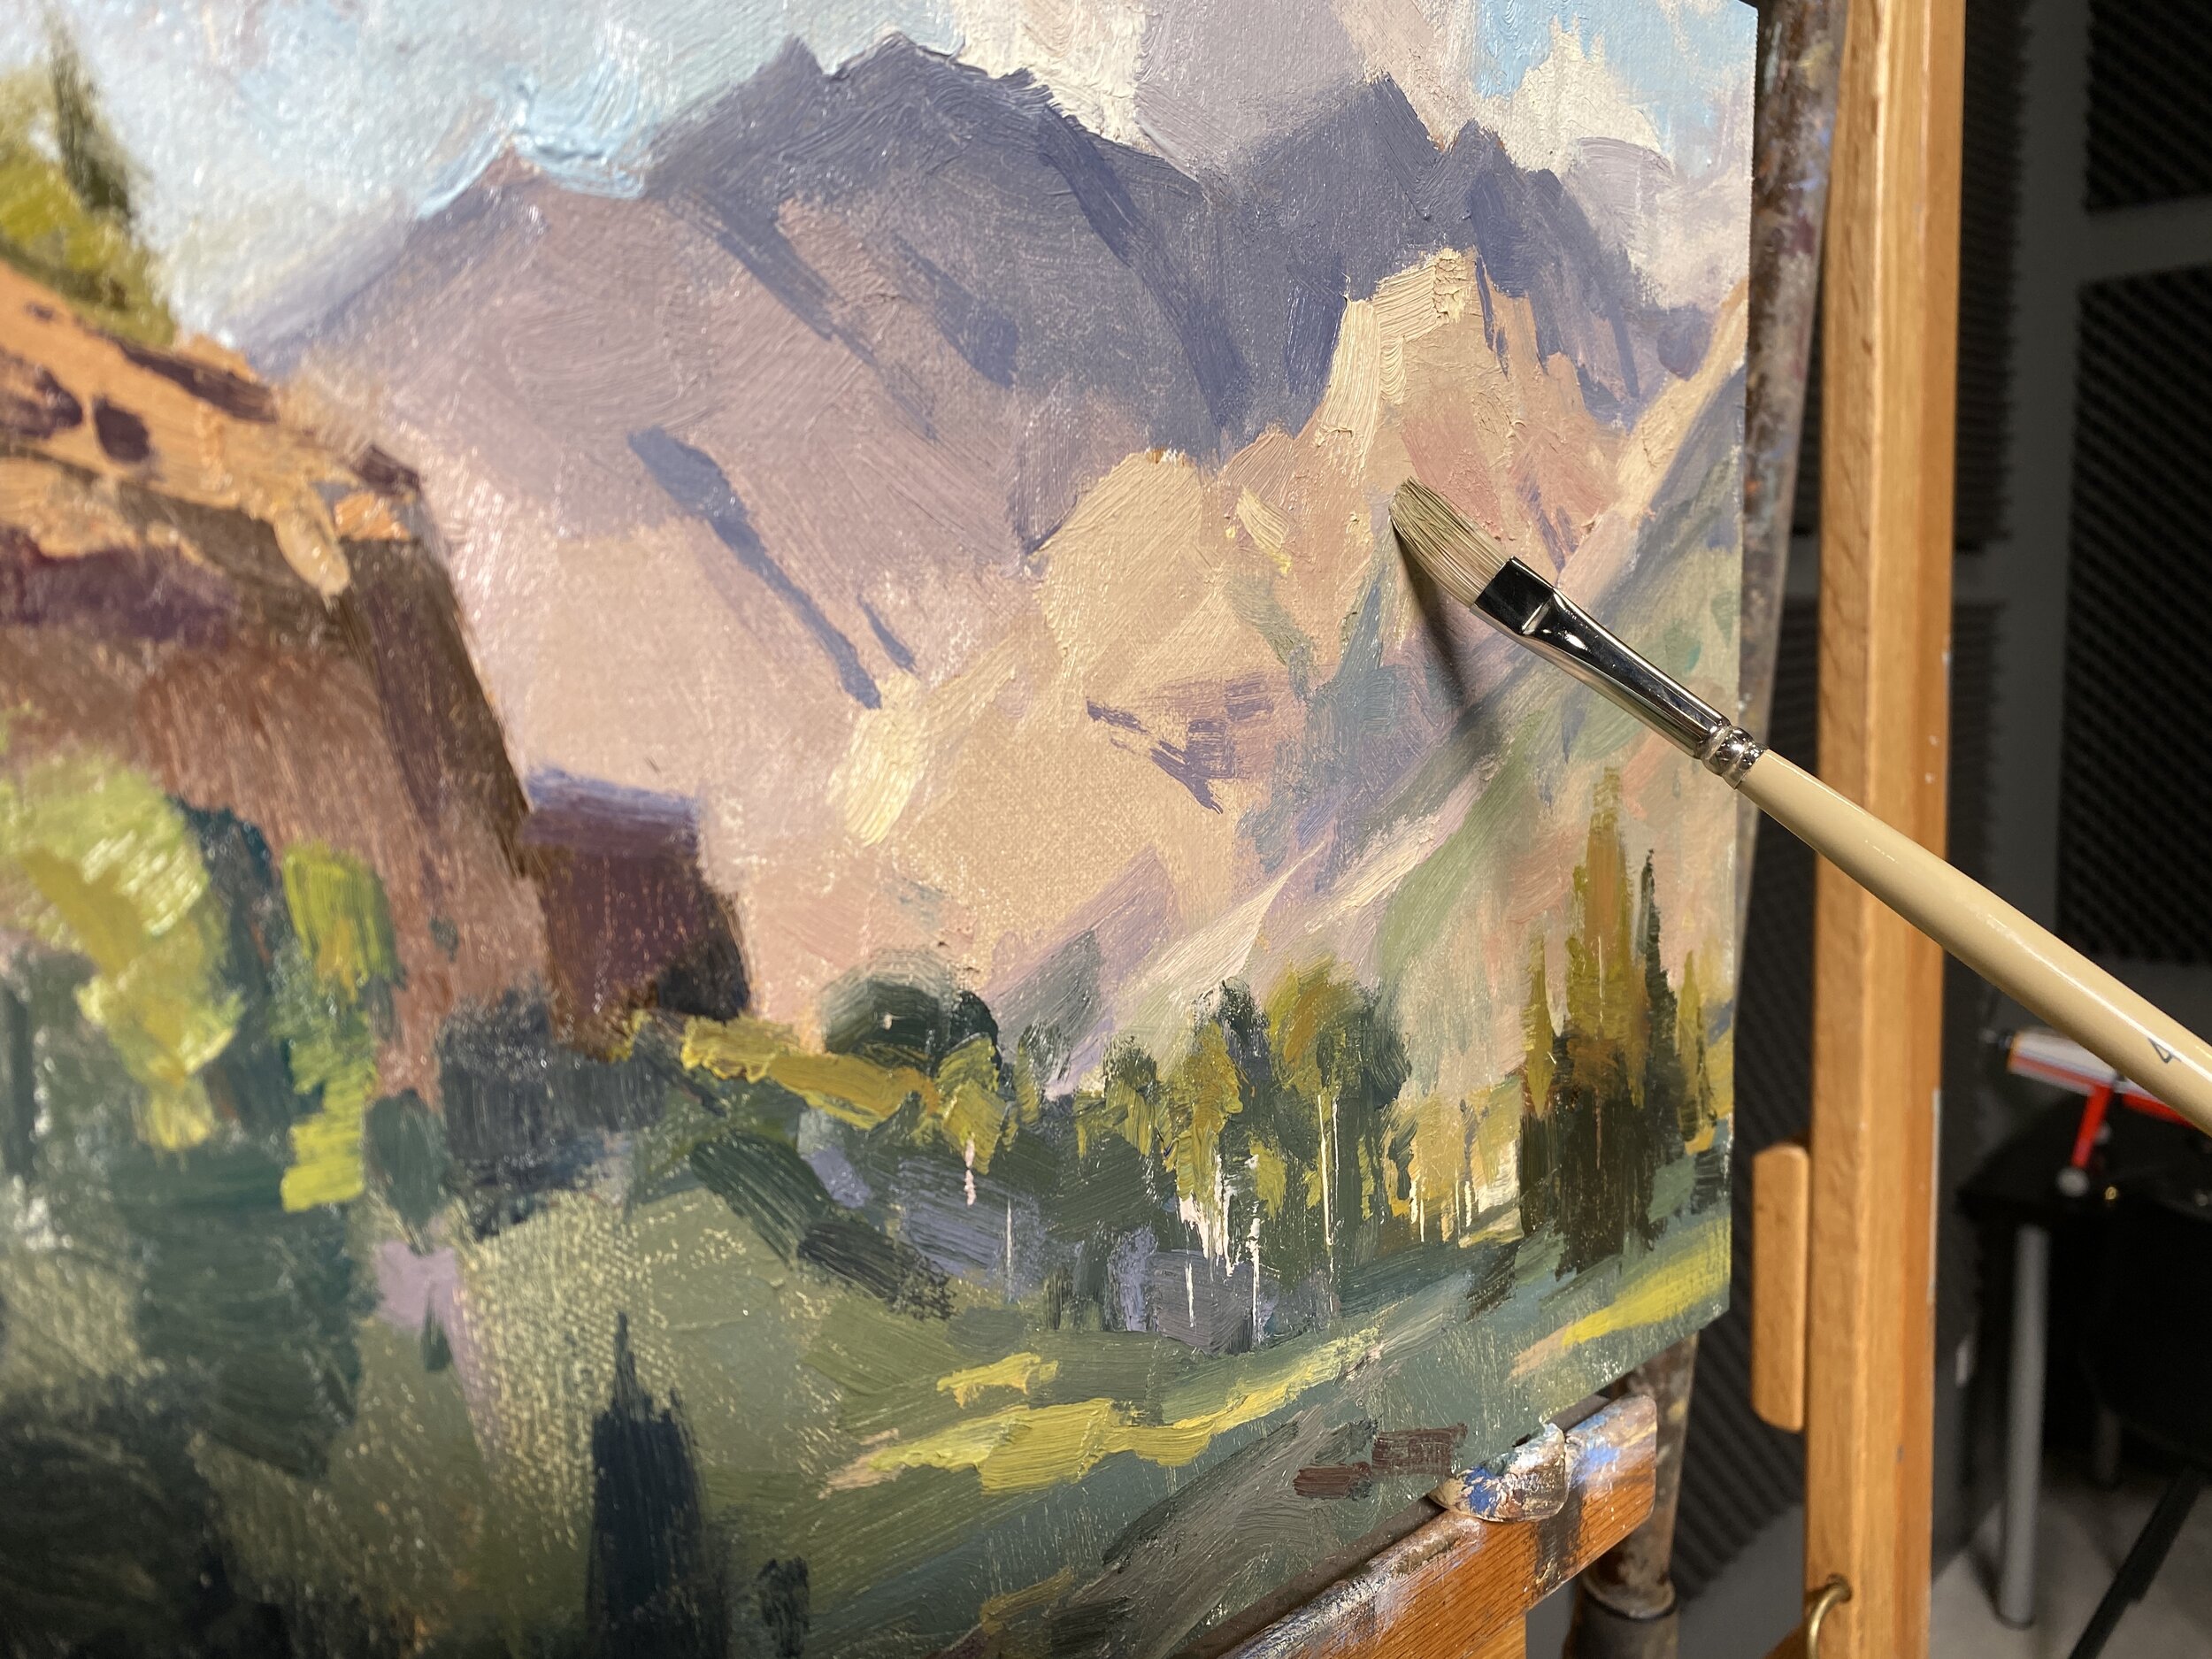 MITCH BAIRD oil painting mentoring Online workshop course - “Painting With Perception” Mentoring, feedback, and video lessons for a year.